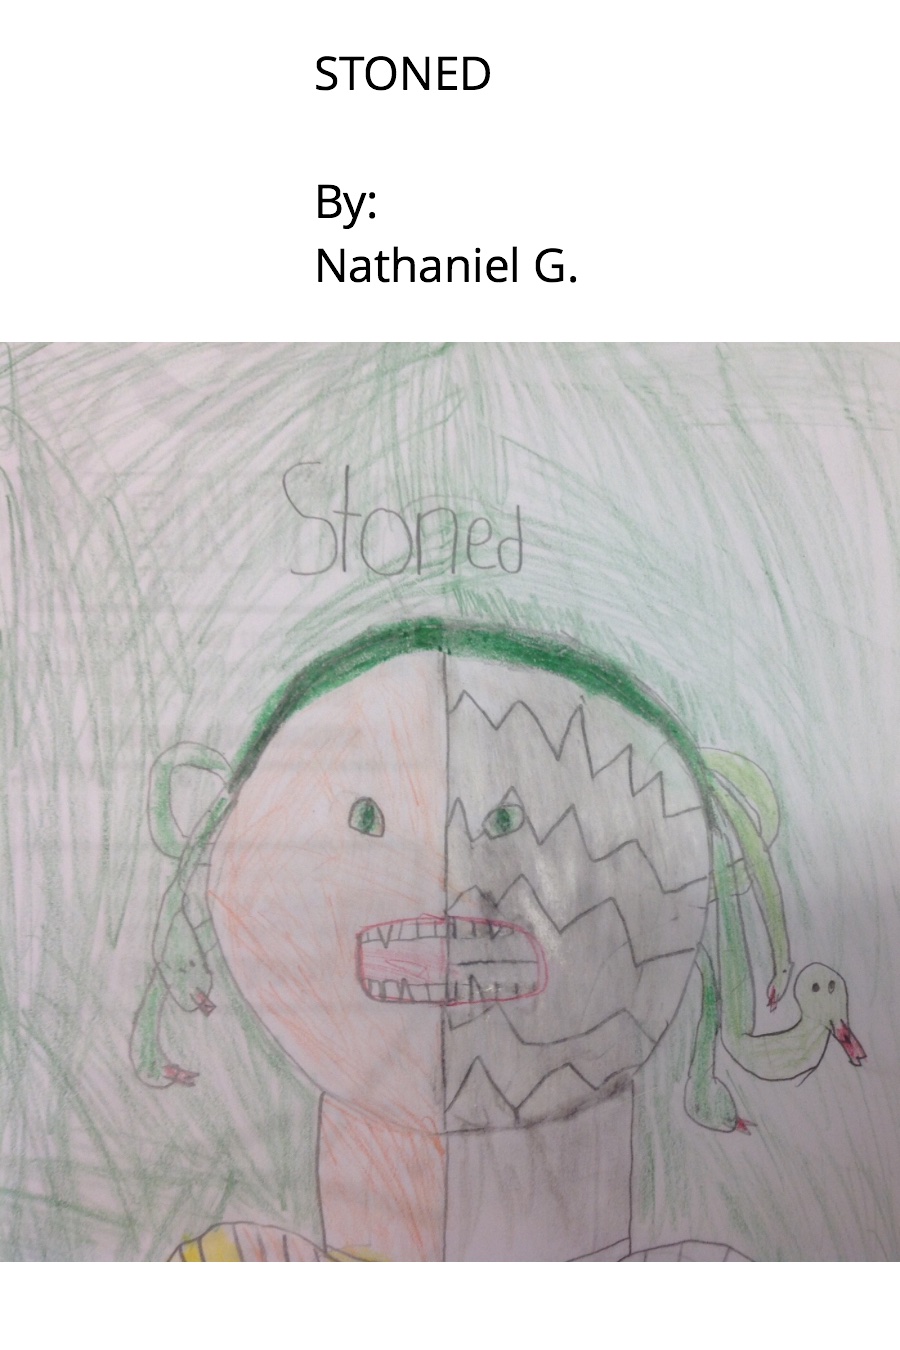 Stoned written by Nathaniel G